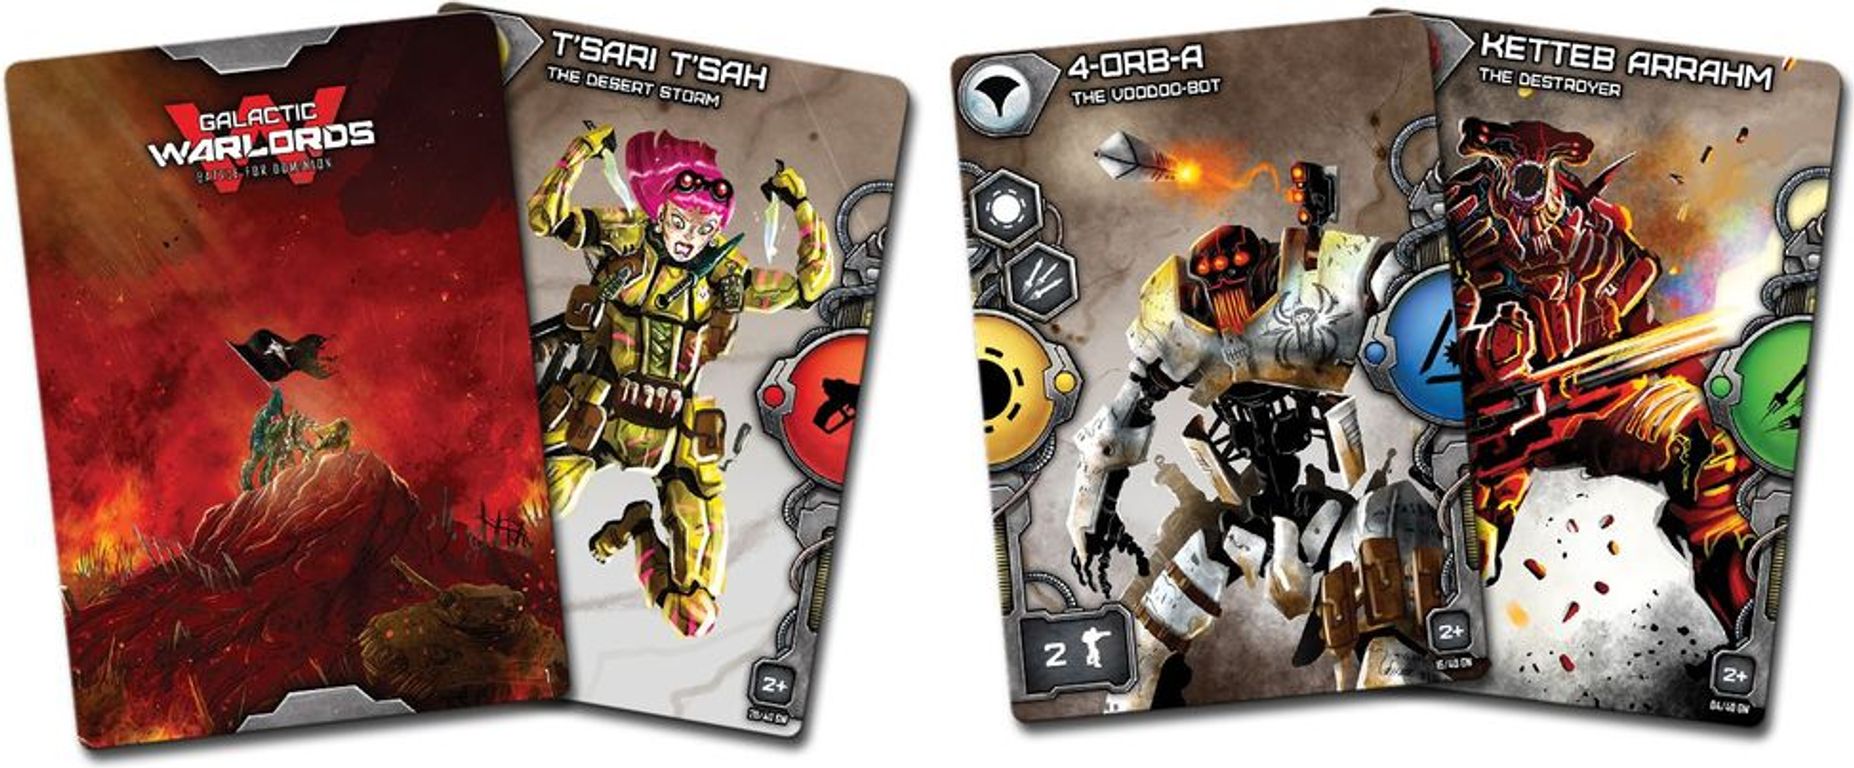 Galactic Warlords: Battle for Dominion cards